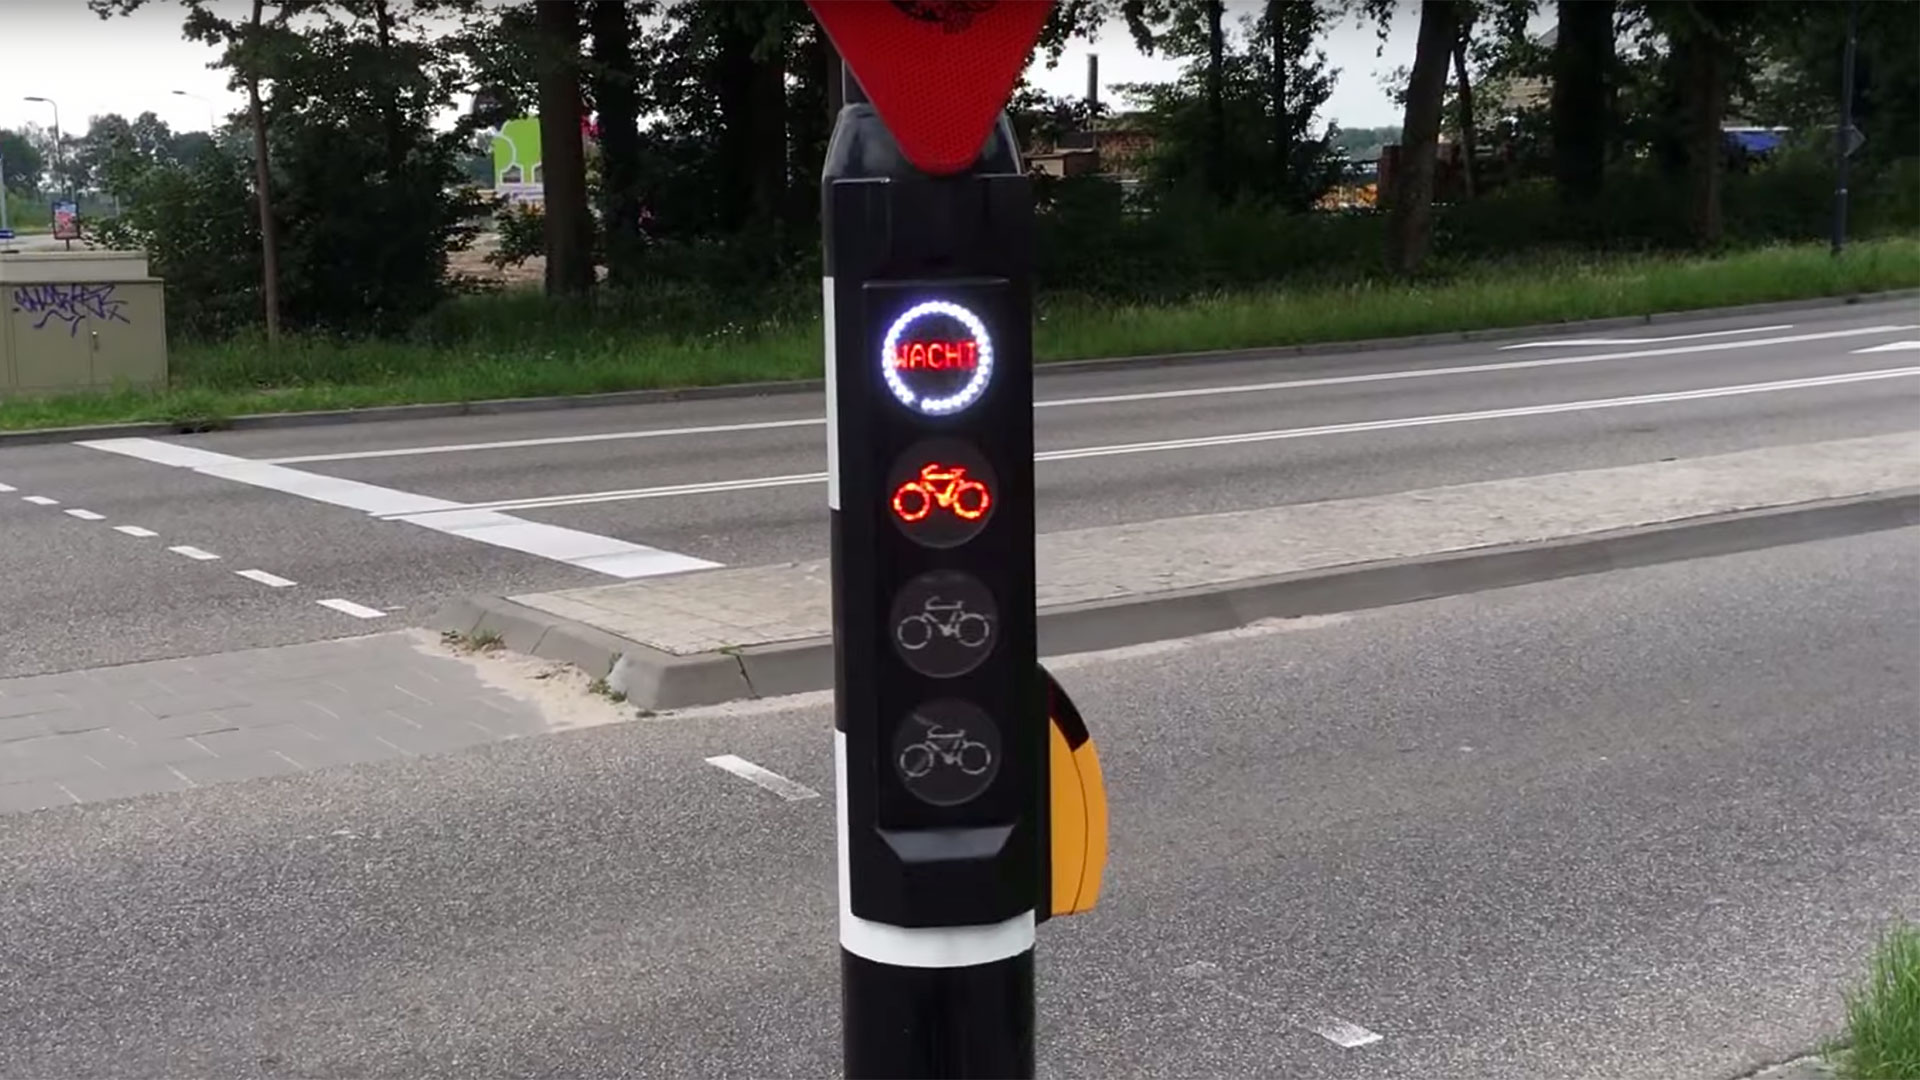 This Dutch City Has the World's Smartest Traffic Lights